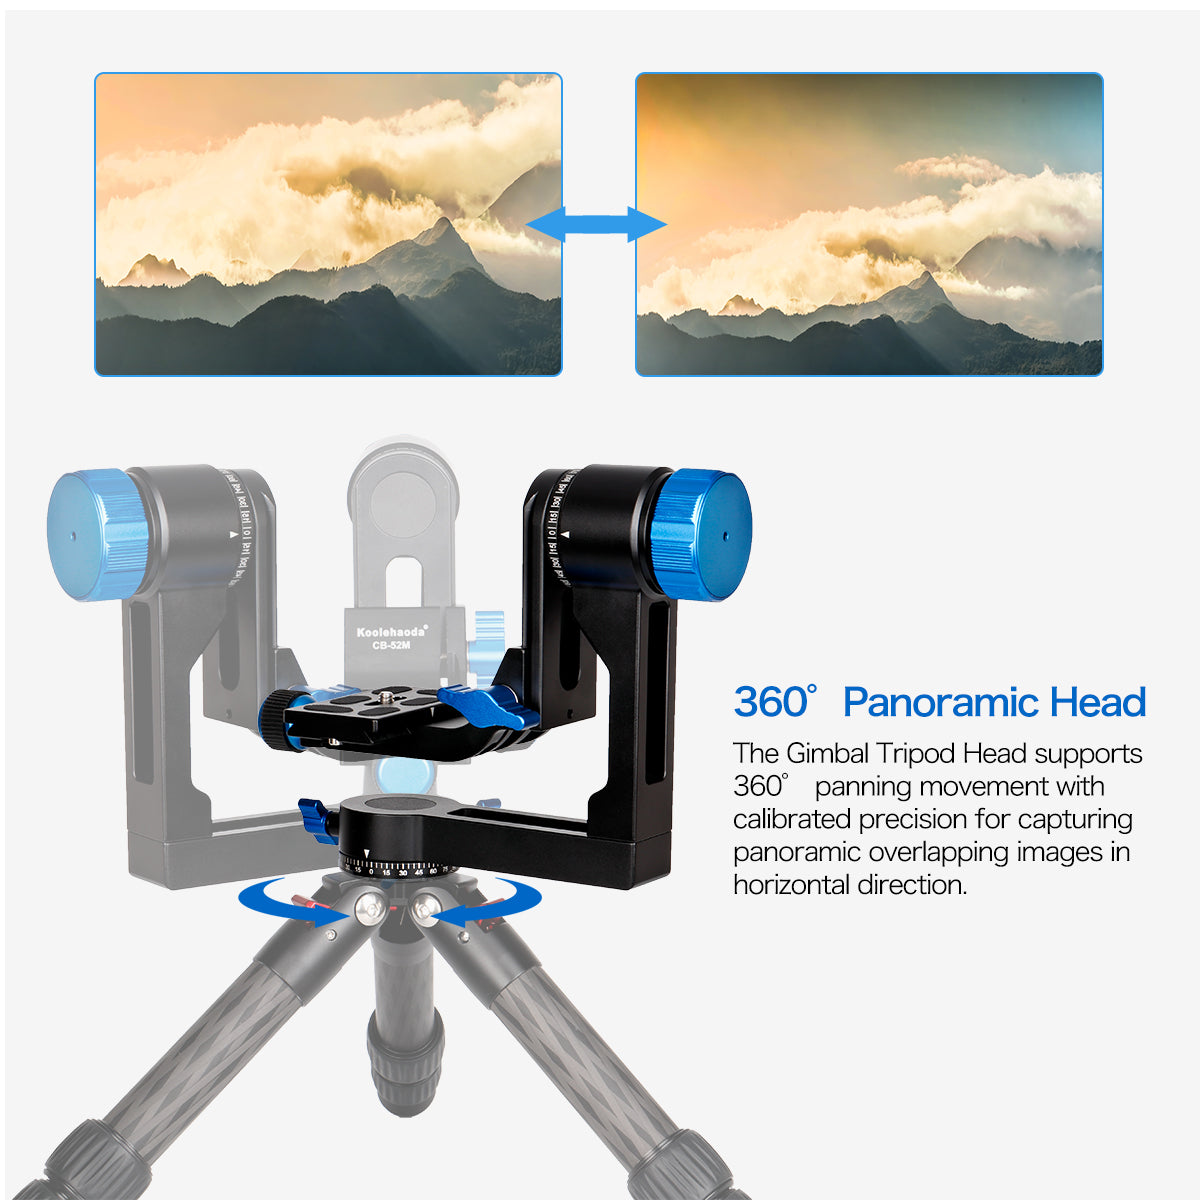 Tripod Gimbal Head 360° Panoramic Head with 75mm Quick Release Plate and Carry Bag for Digital SLR Cameras,up to 33lbs/15kg (CB-52M)